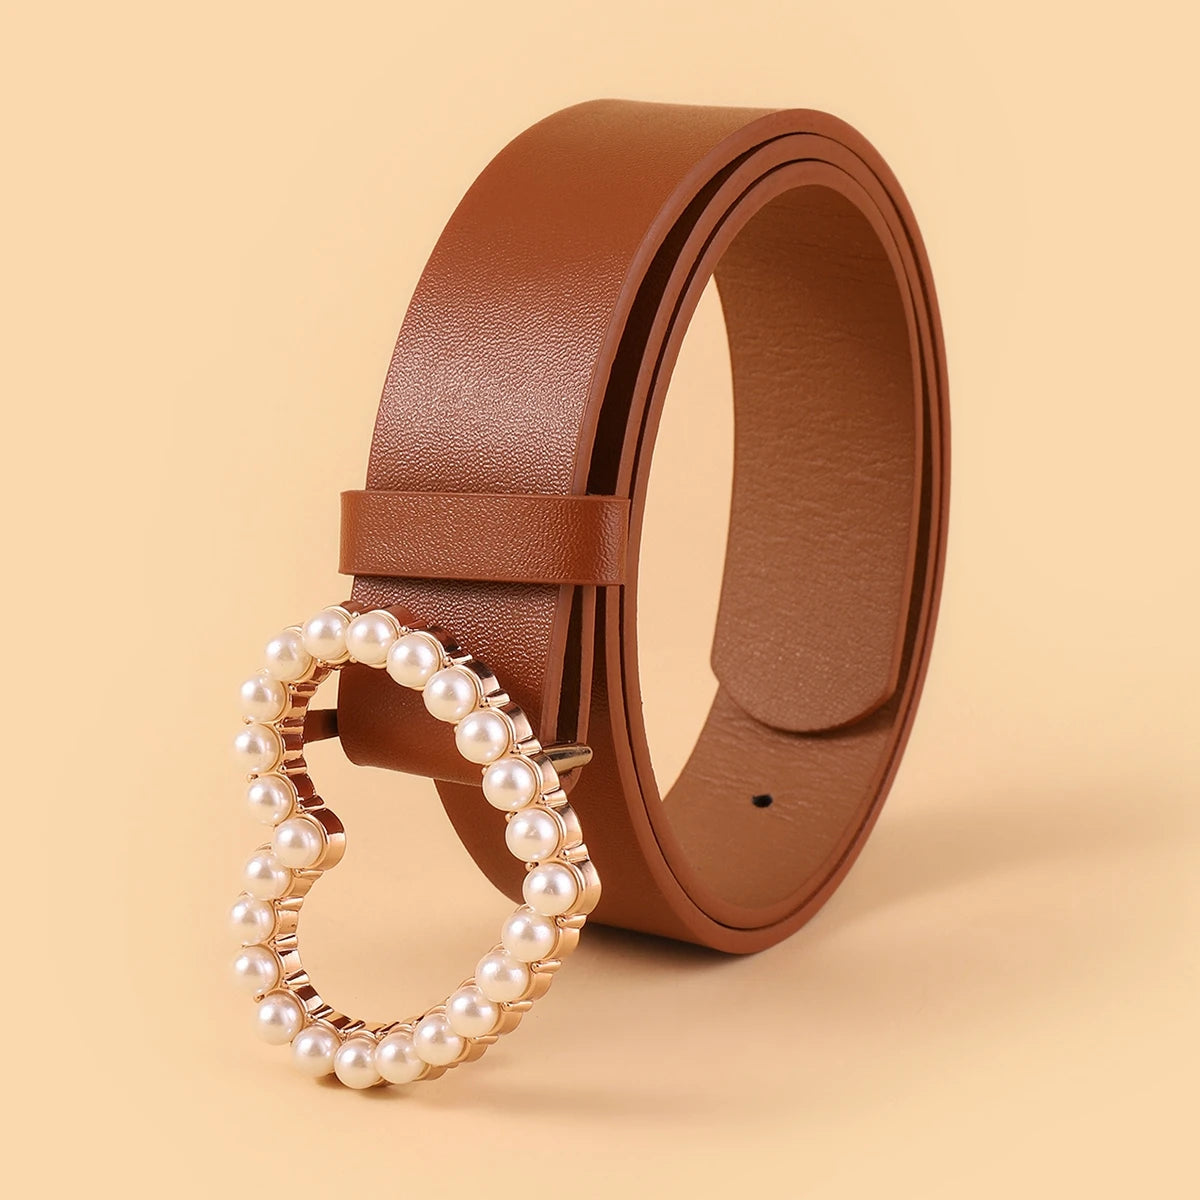 Pearl Hearts Vegan Leather Womens Belt | Hypoallergenic - Allergy Friendly - Naturally Free